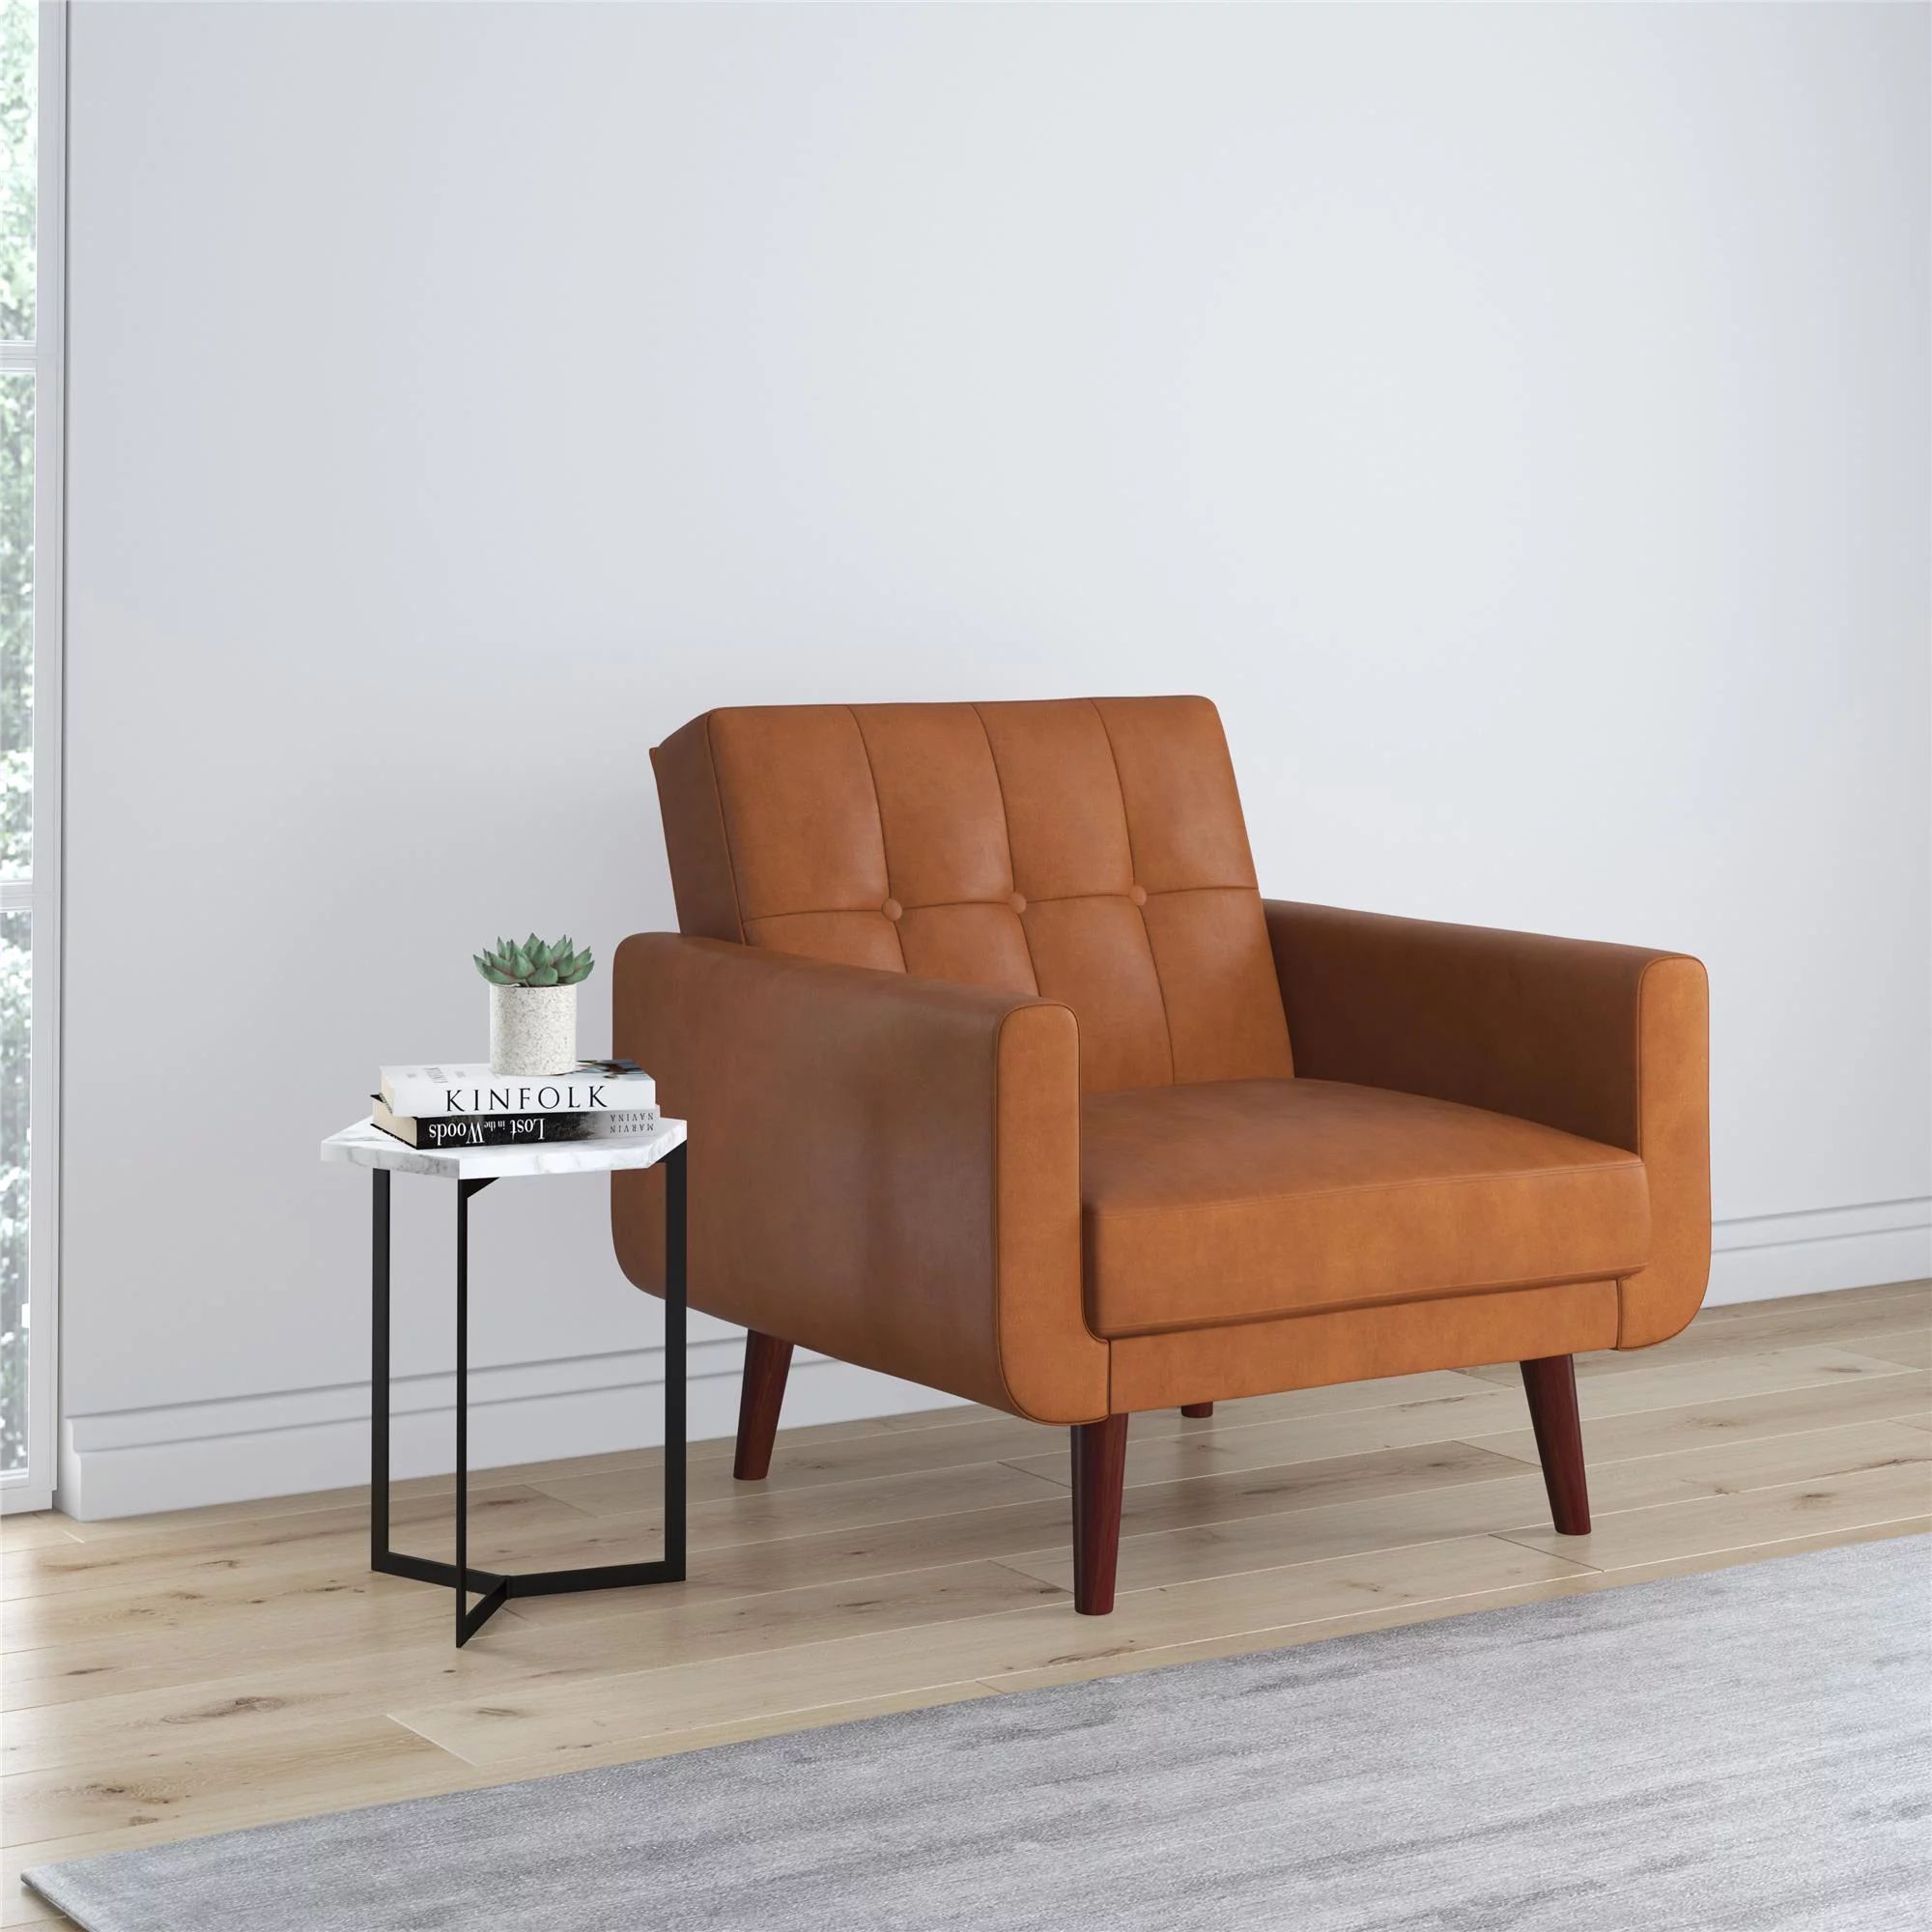 Better Homes & Gardens Nola Modern Chair with Arms, Camel Faux Leather | Walmart (US)